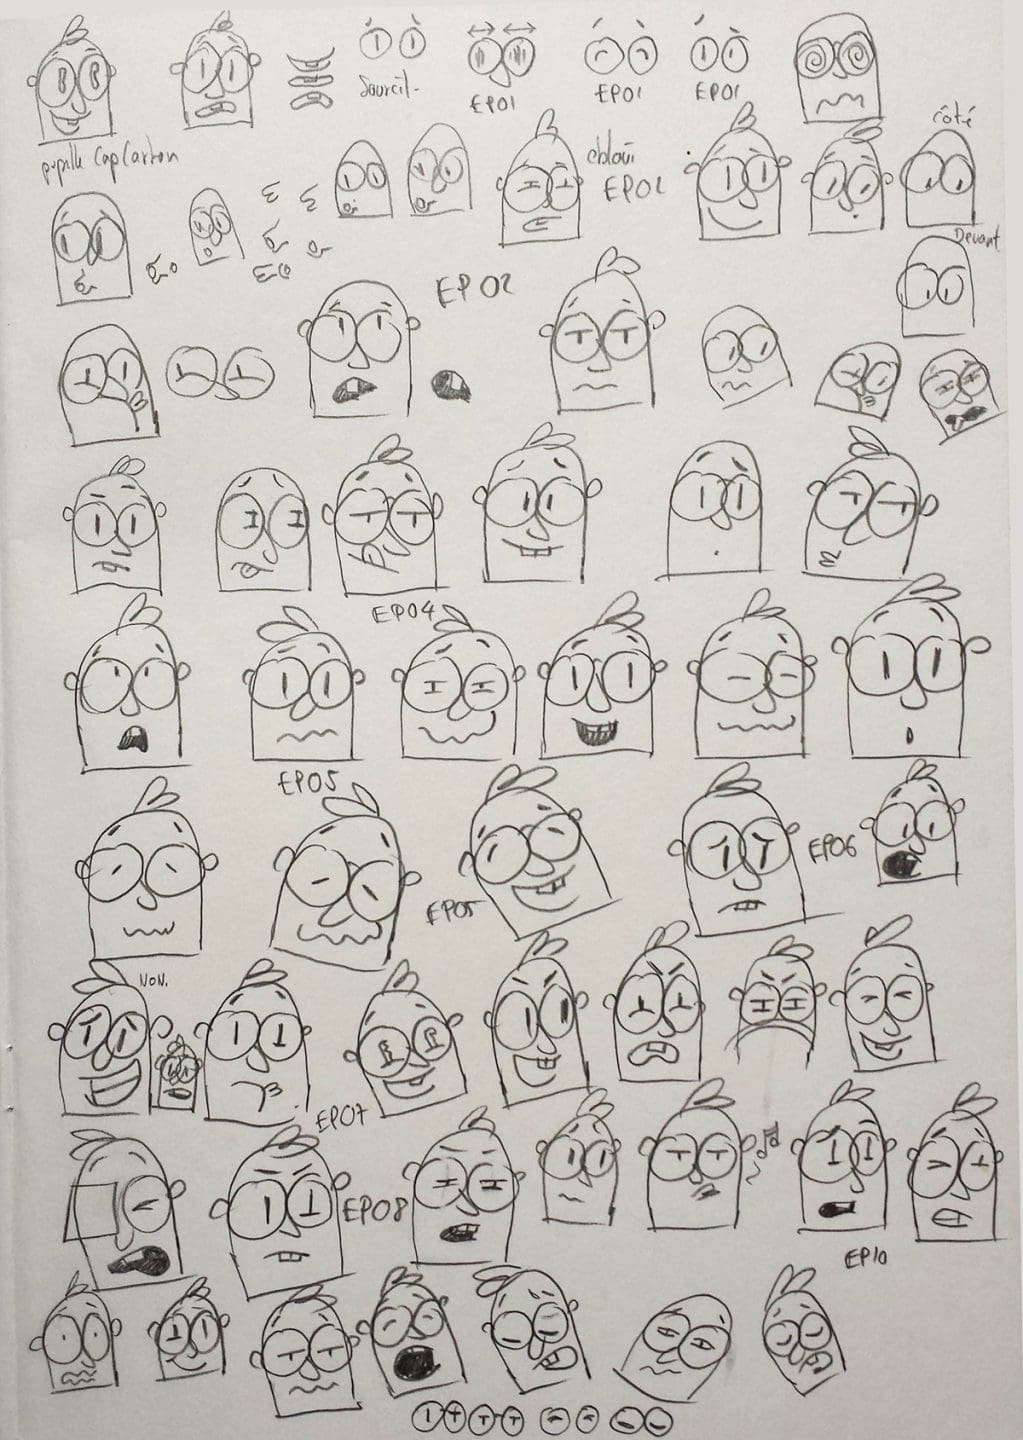 Expression sheet for the character Mr. Carton.